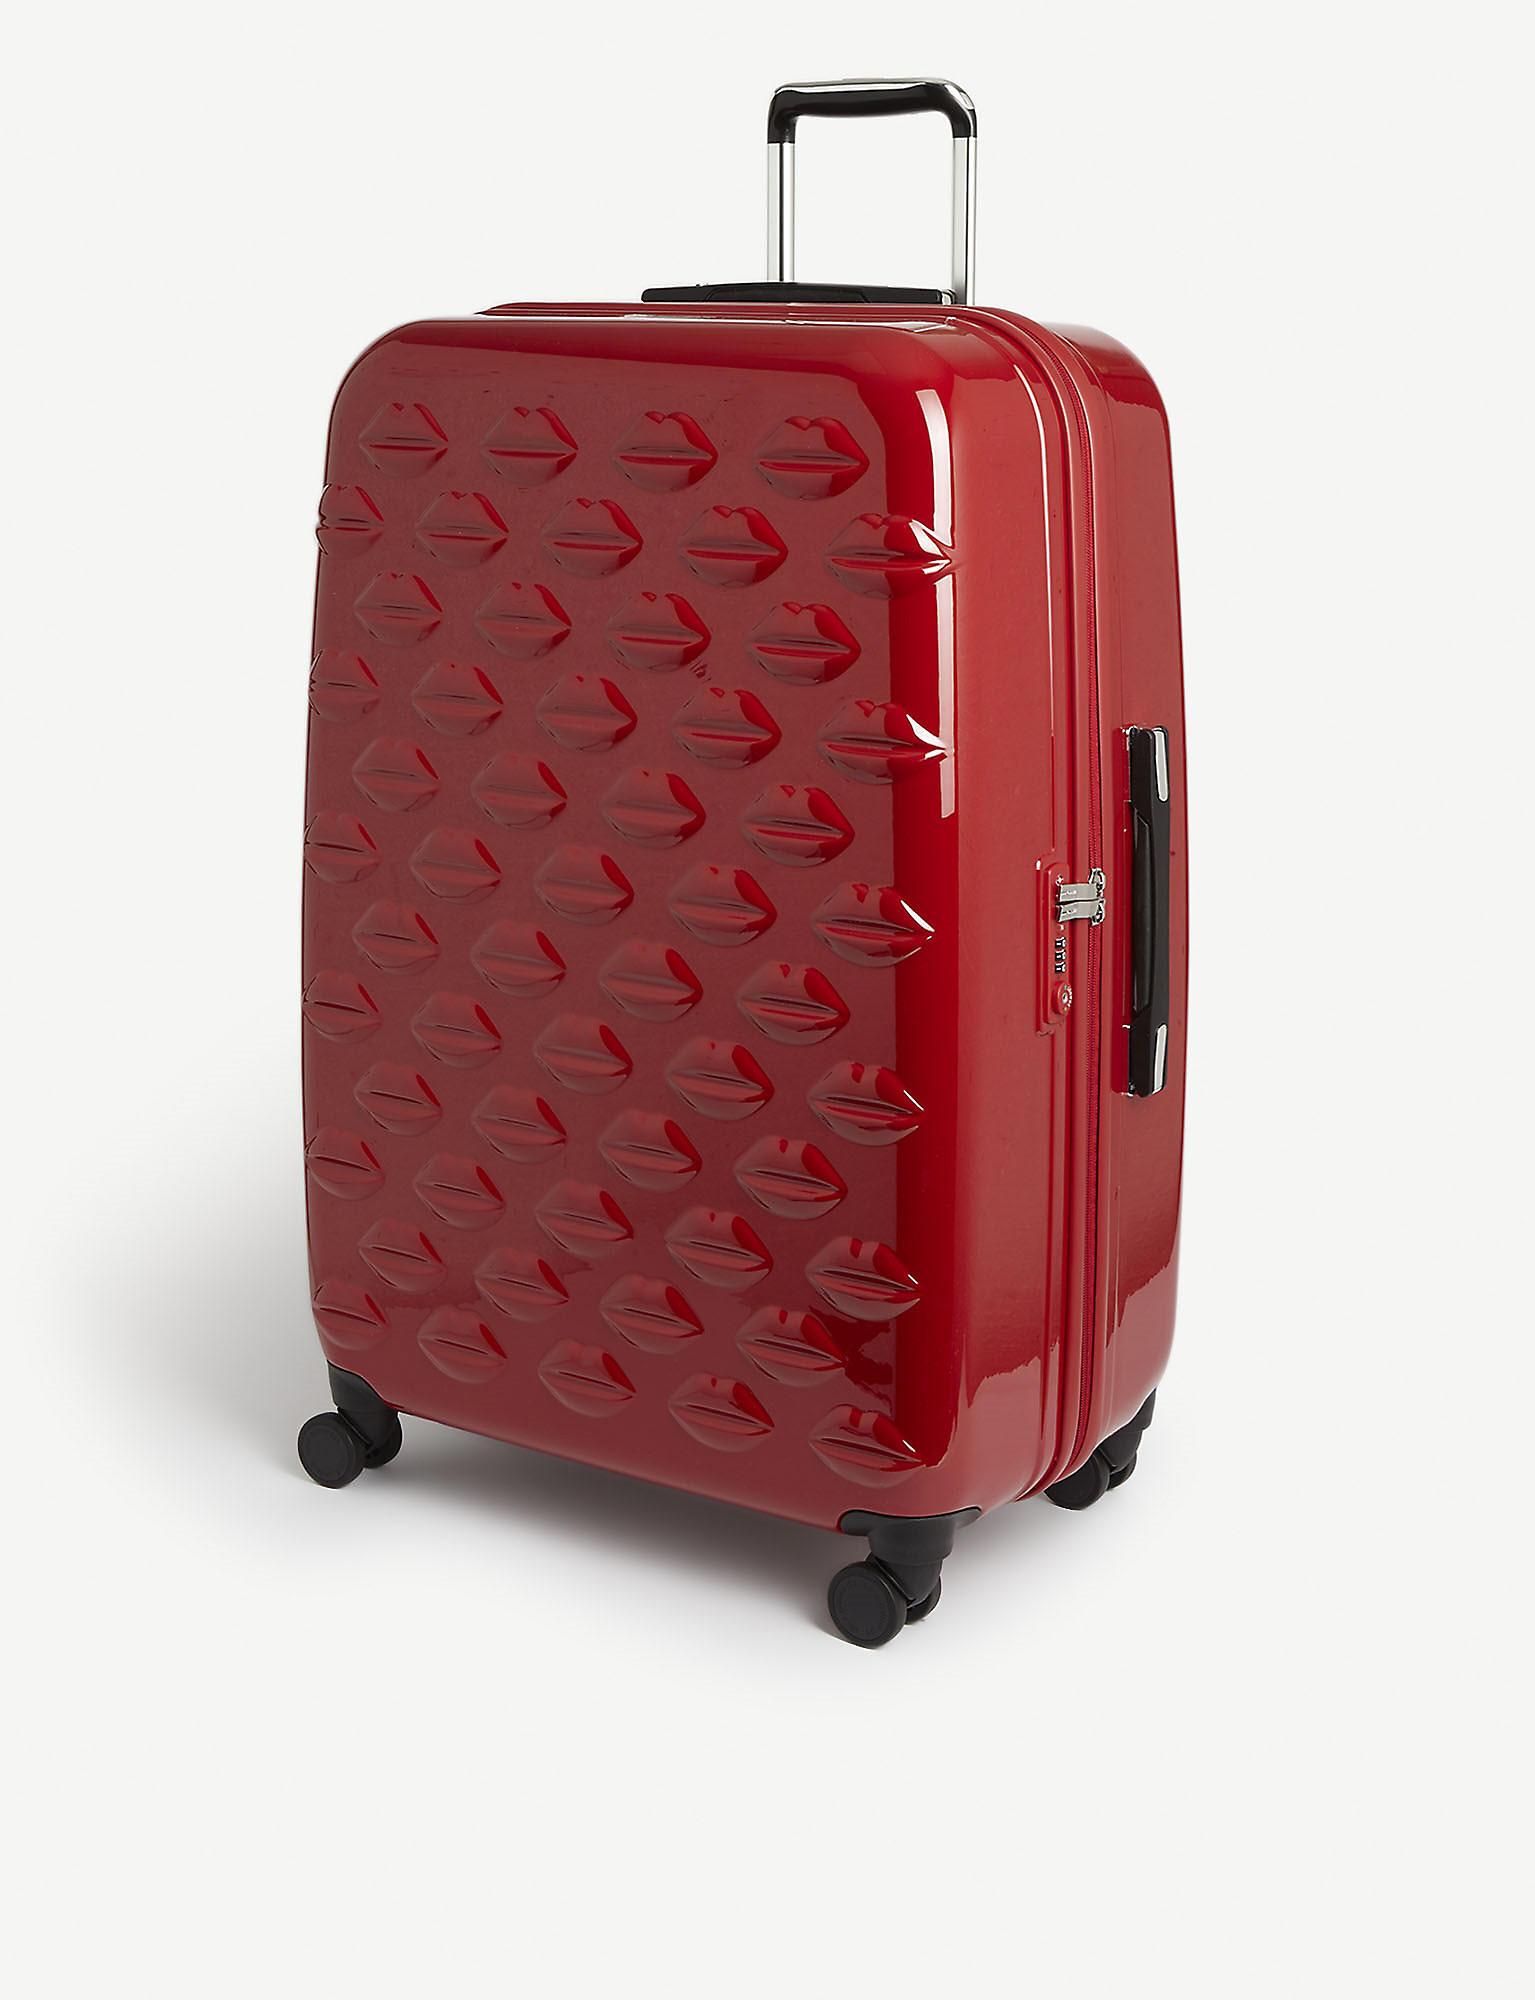 Lulu Guinness Large Embossed Lips Suitcase in Red